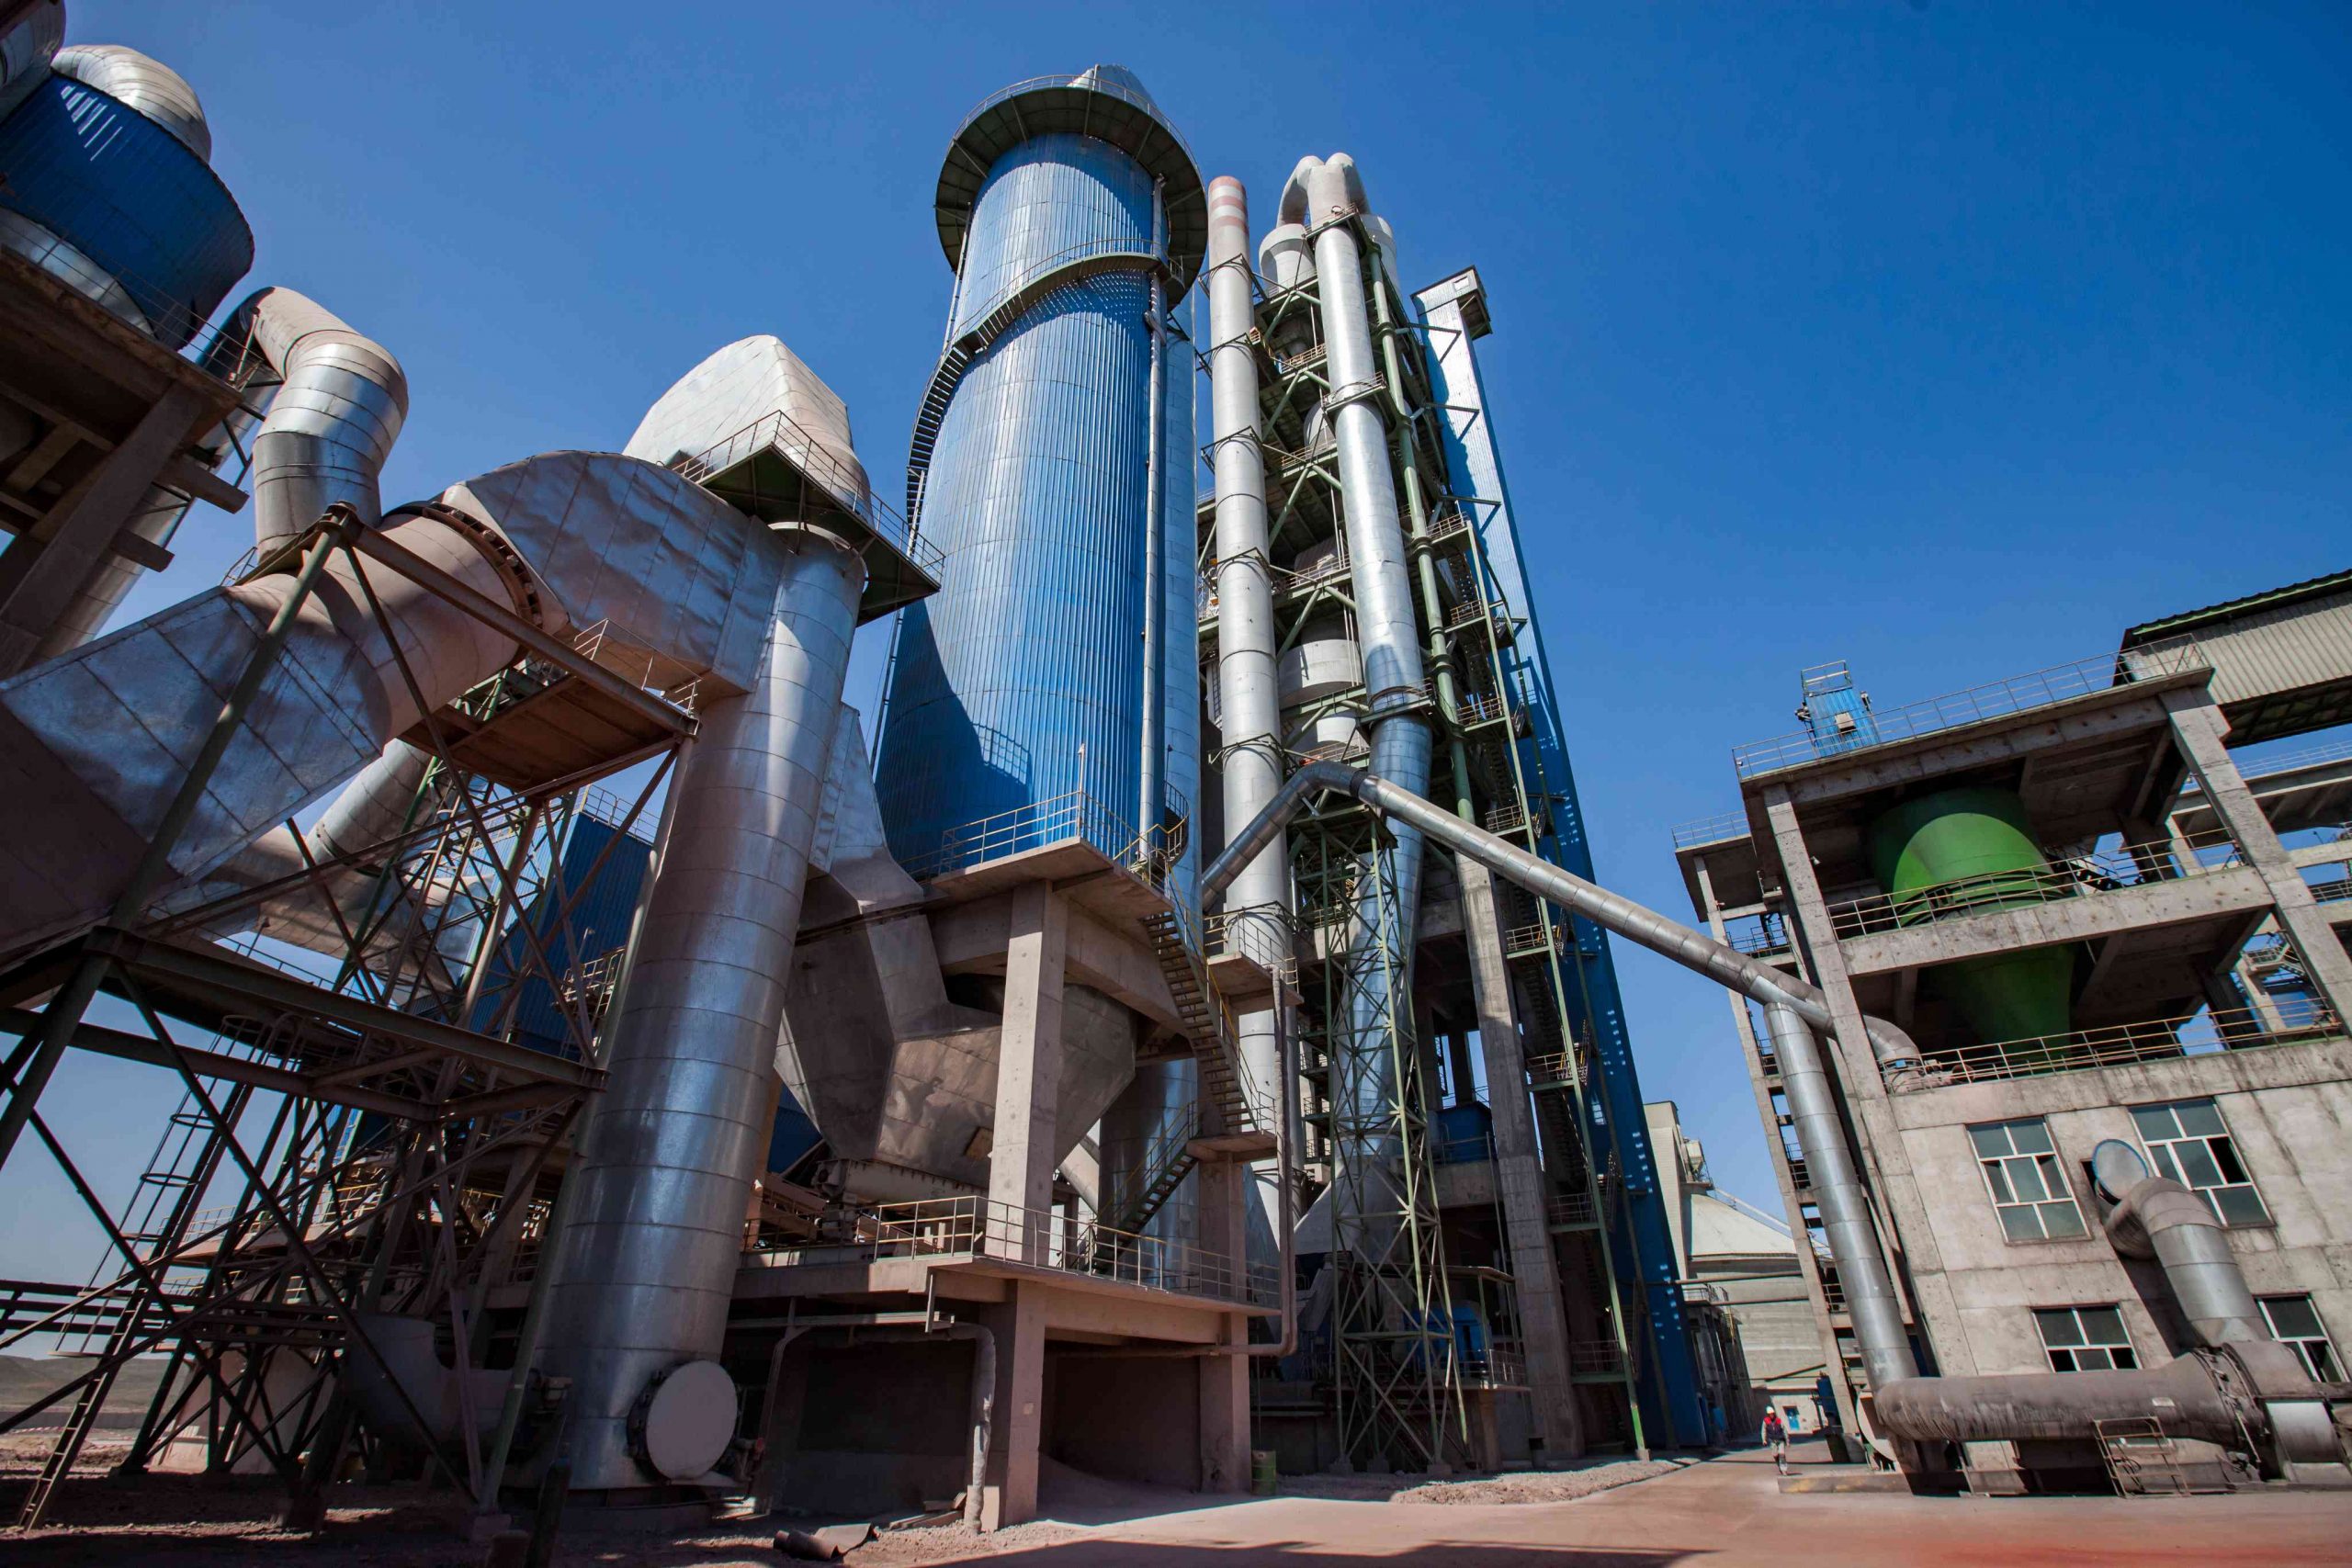 Image of equipment used for producing cement at a cement plant